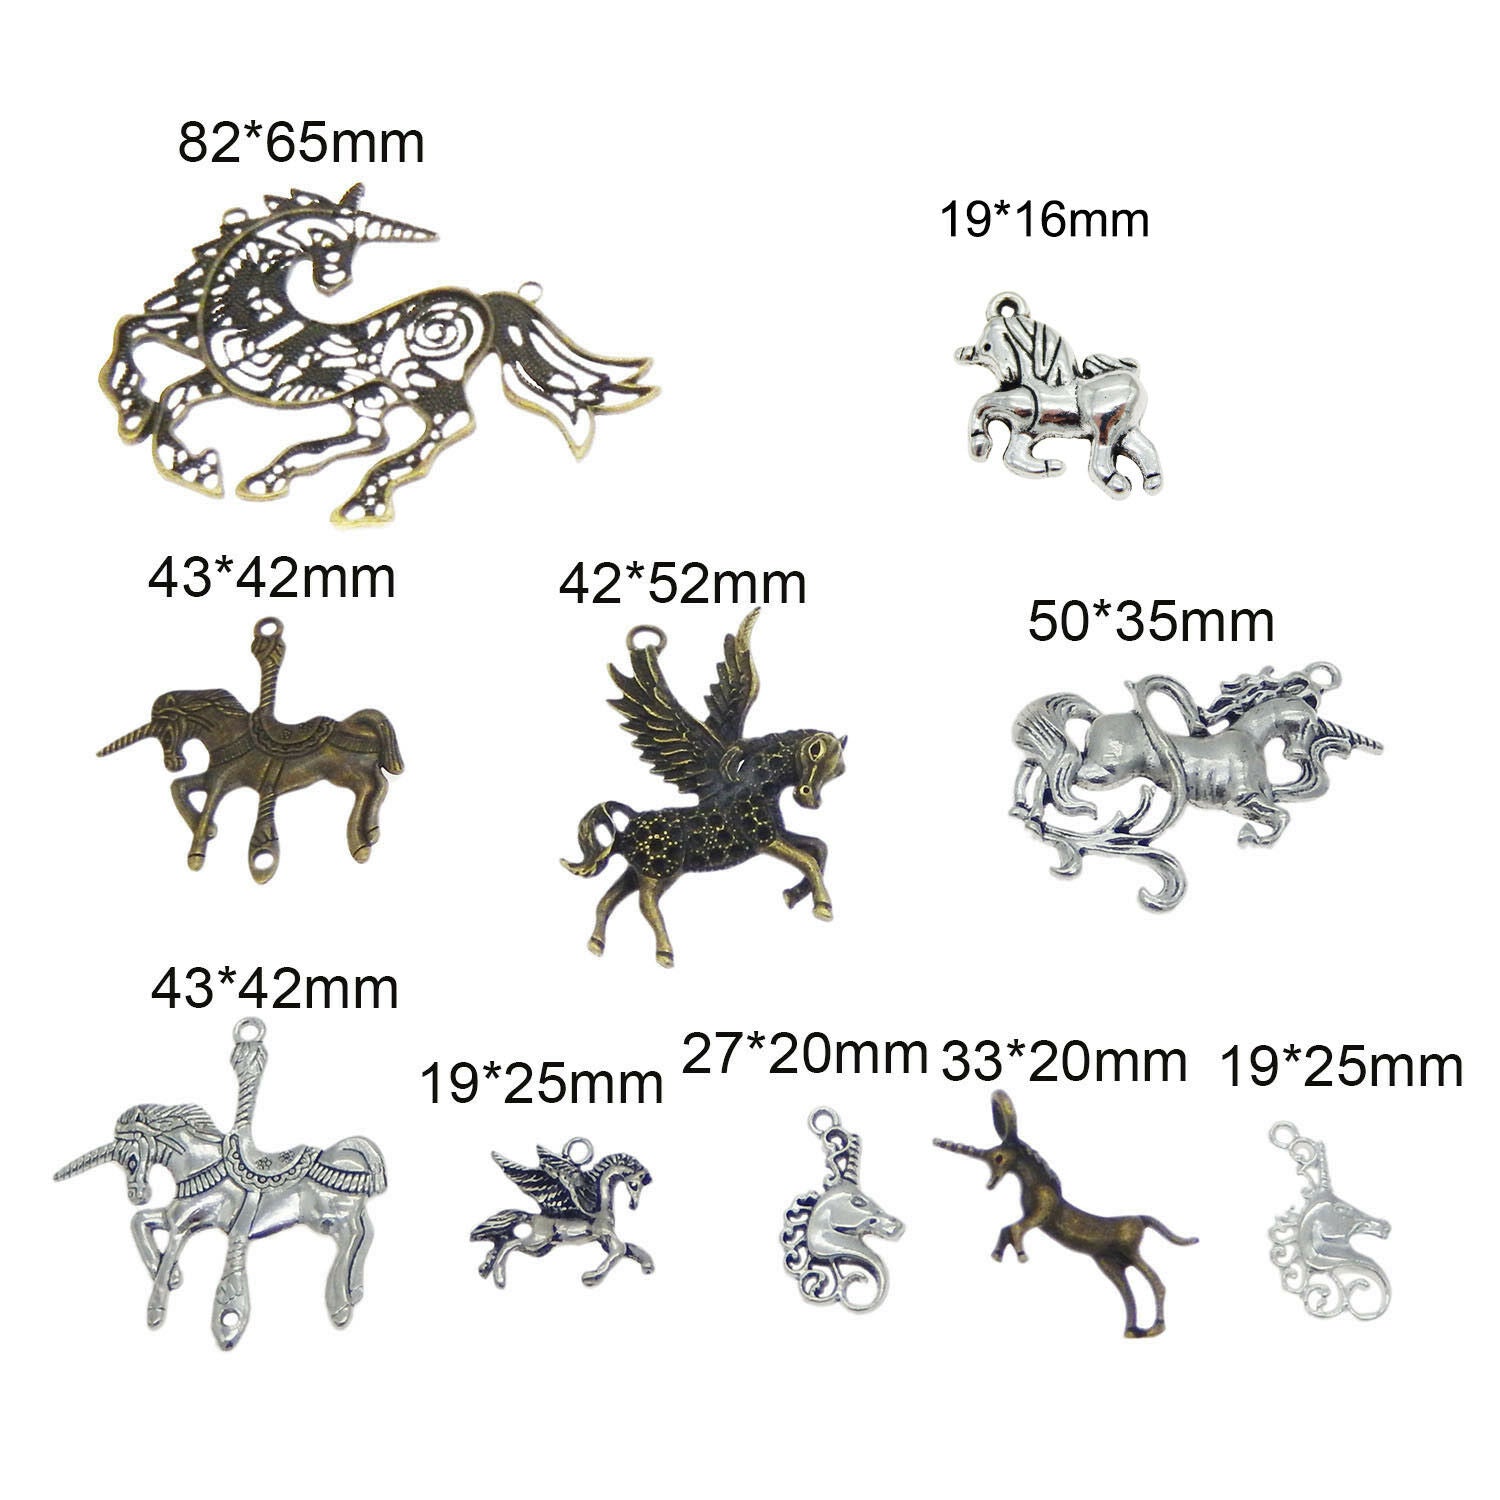 10 Mixed Metal Alloy Unicorn Charms Pendants DIY Jewelry Making Accessories